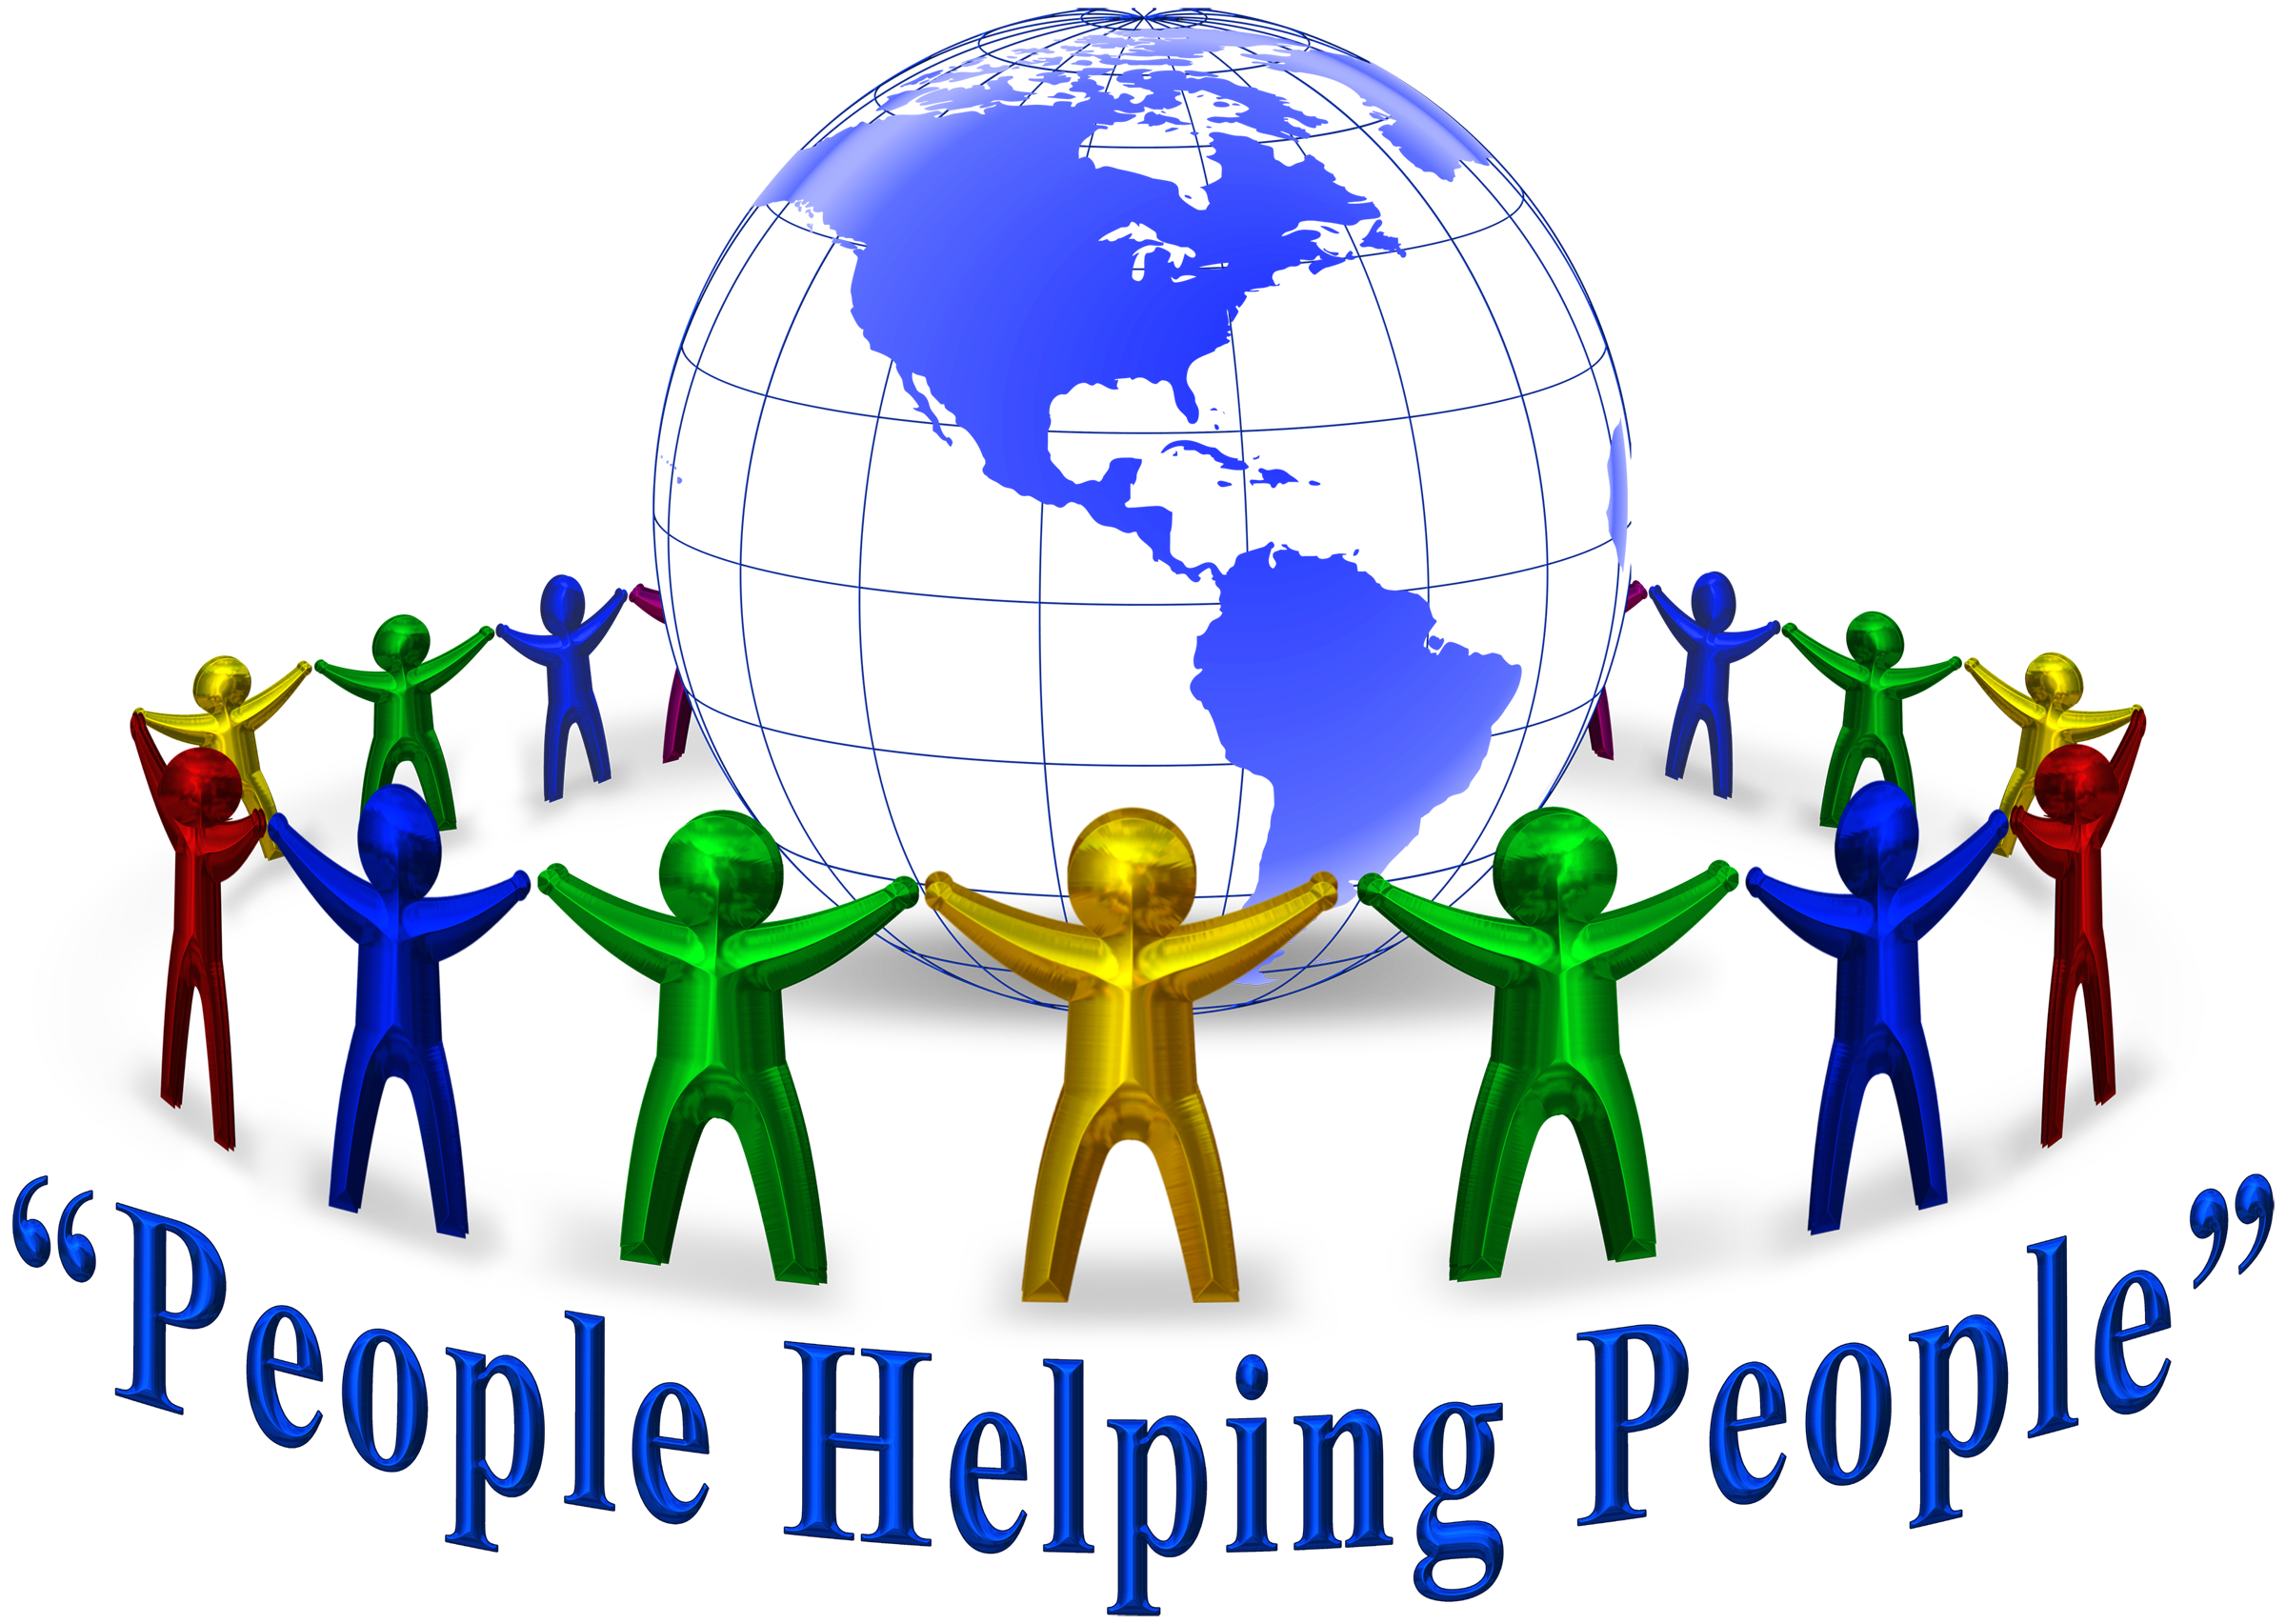 Free Image Of Helping People, Download Free Image Of Helping People png image, Free ClipArts on Clipart Library